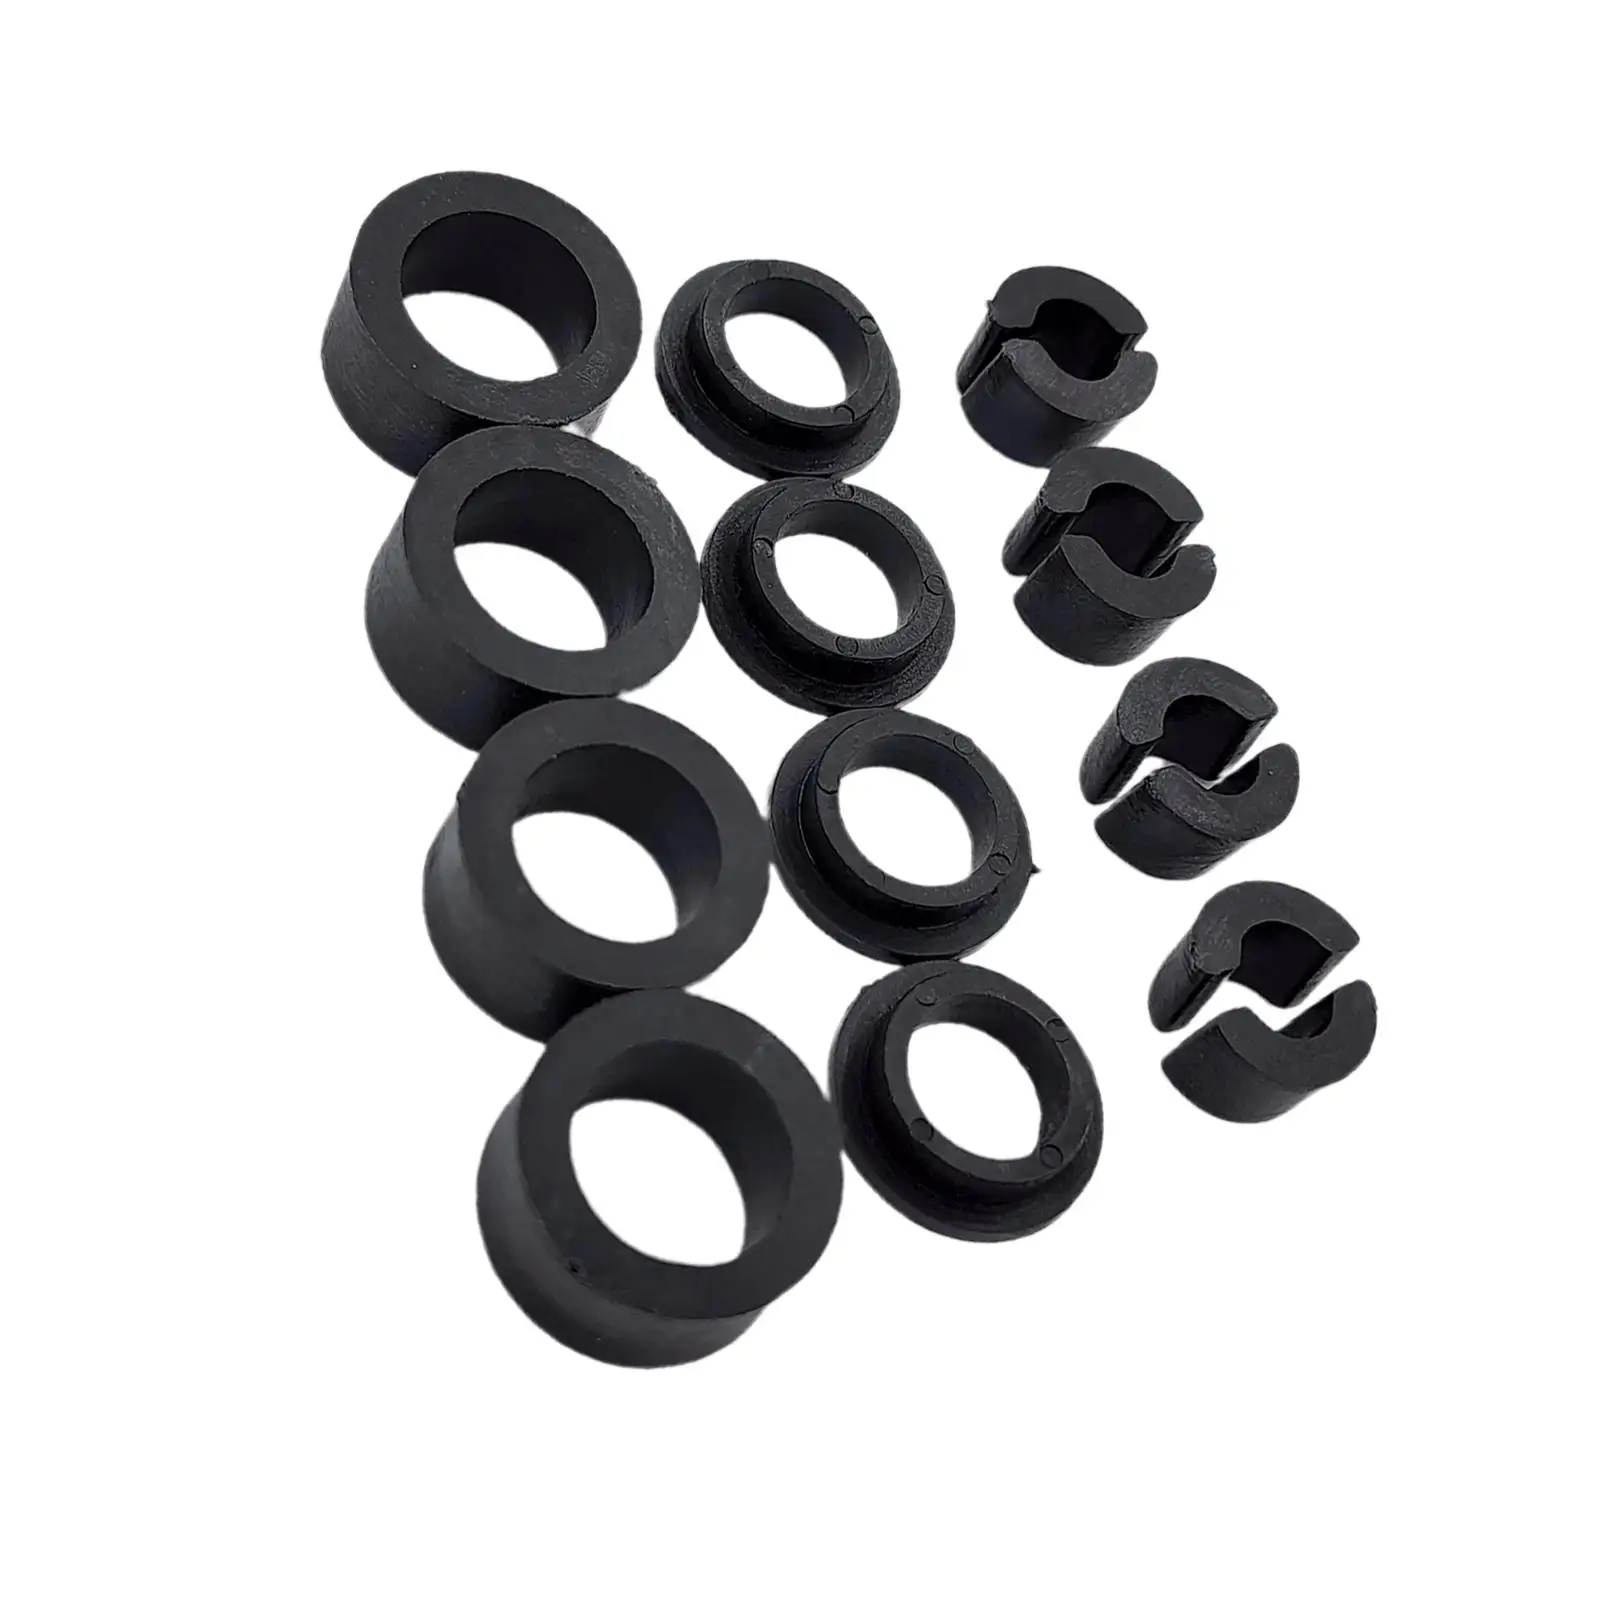 Front Seat Support Mount Bushing, Wobbly Loose Seat Fix for TJ Lj Unlimited Direct Replaces Auto Supplies Accessories